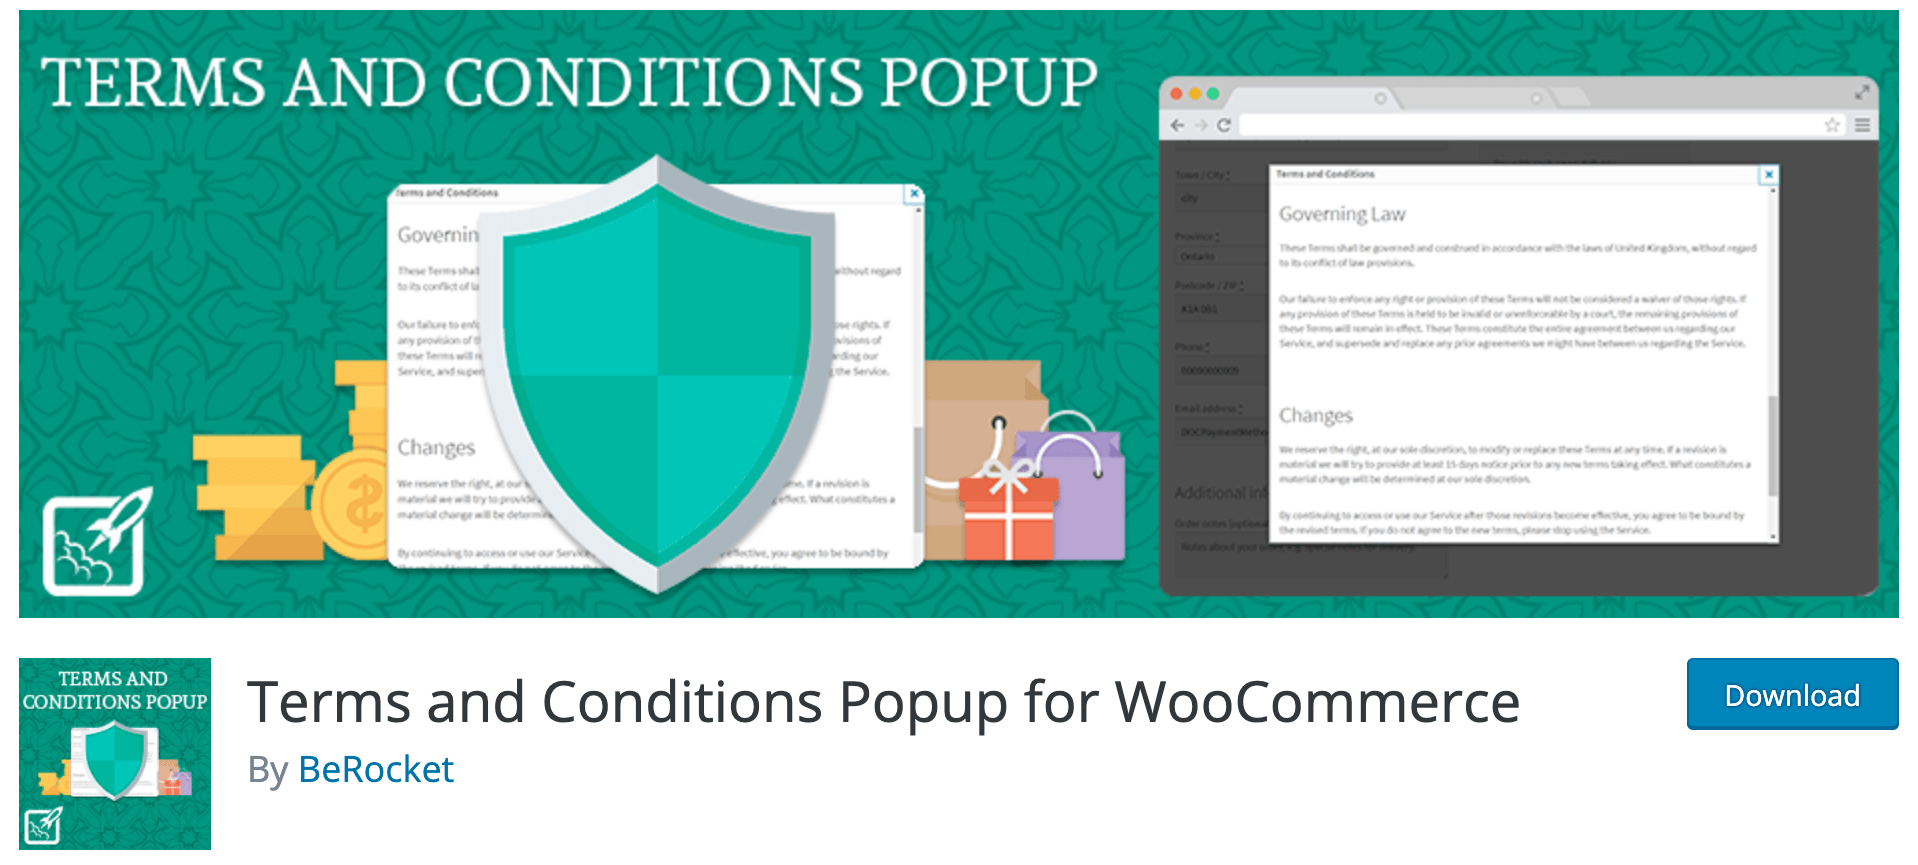 Terms and Conditions Popup for WooCommerce